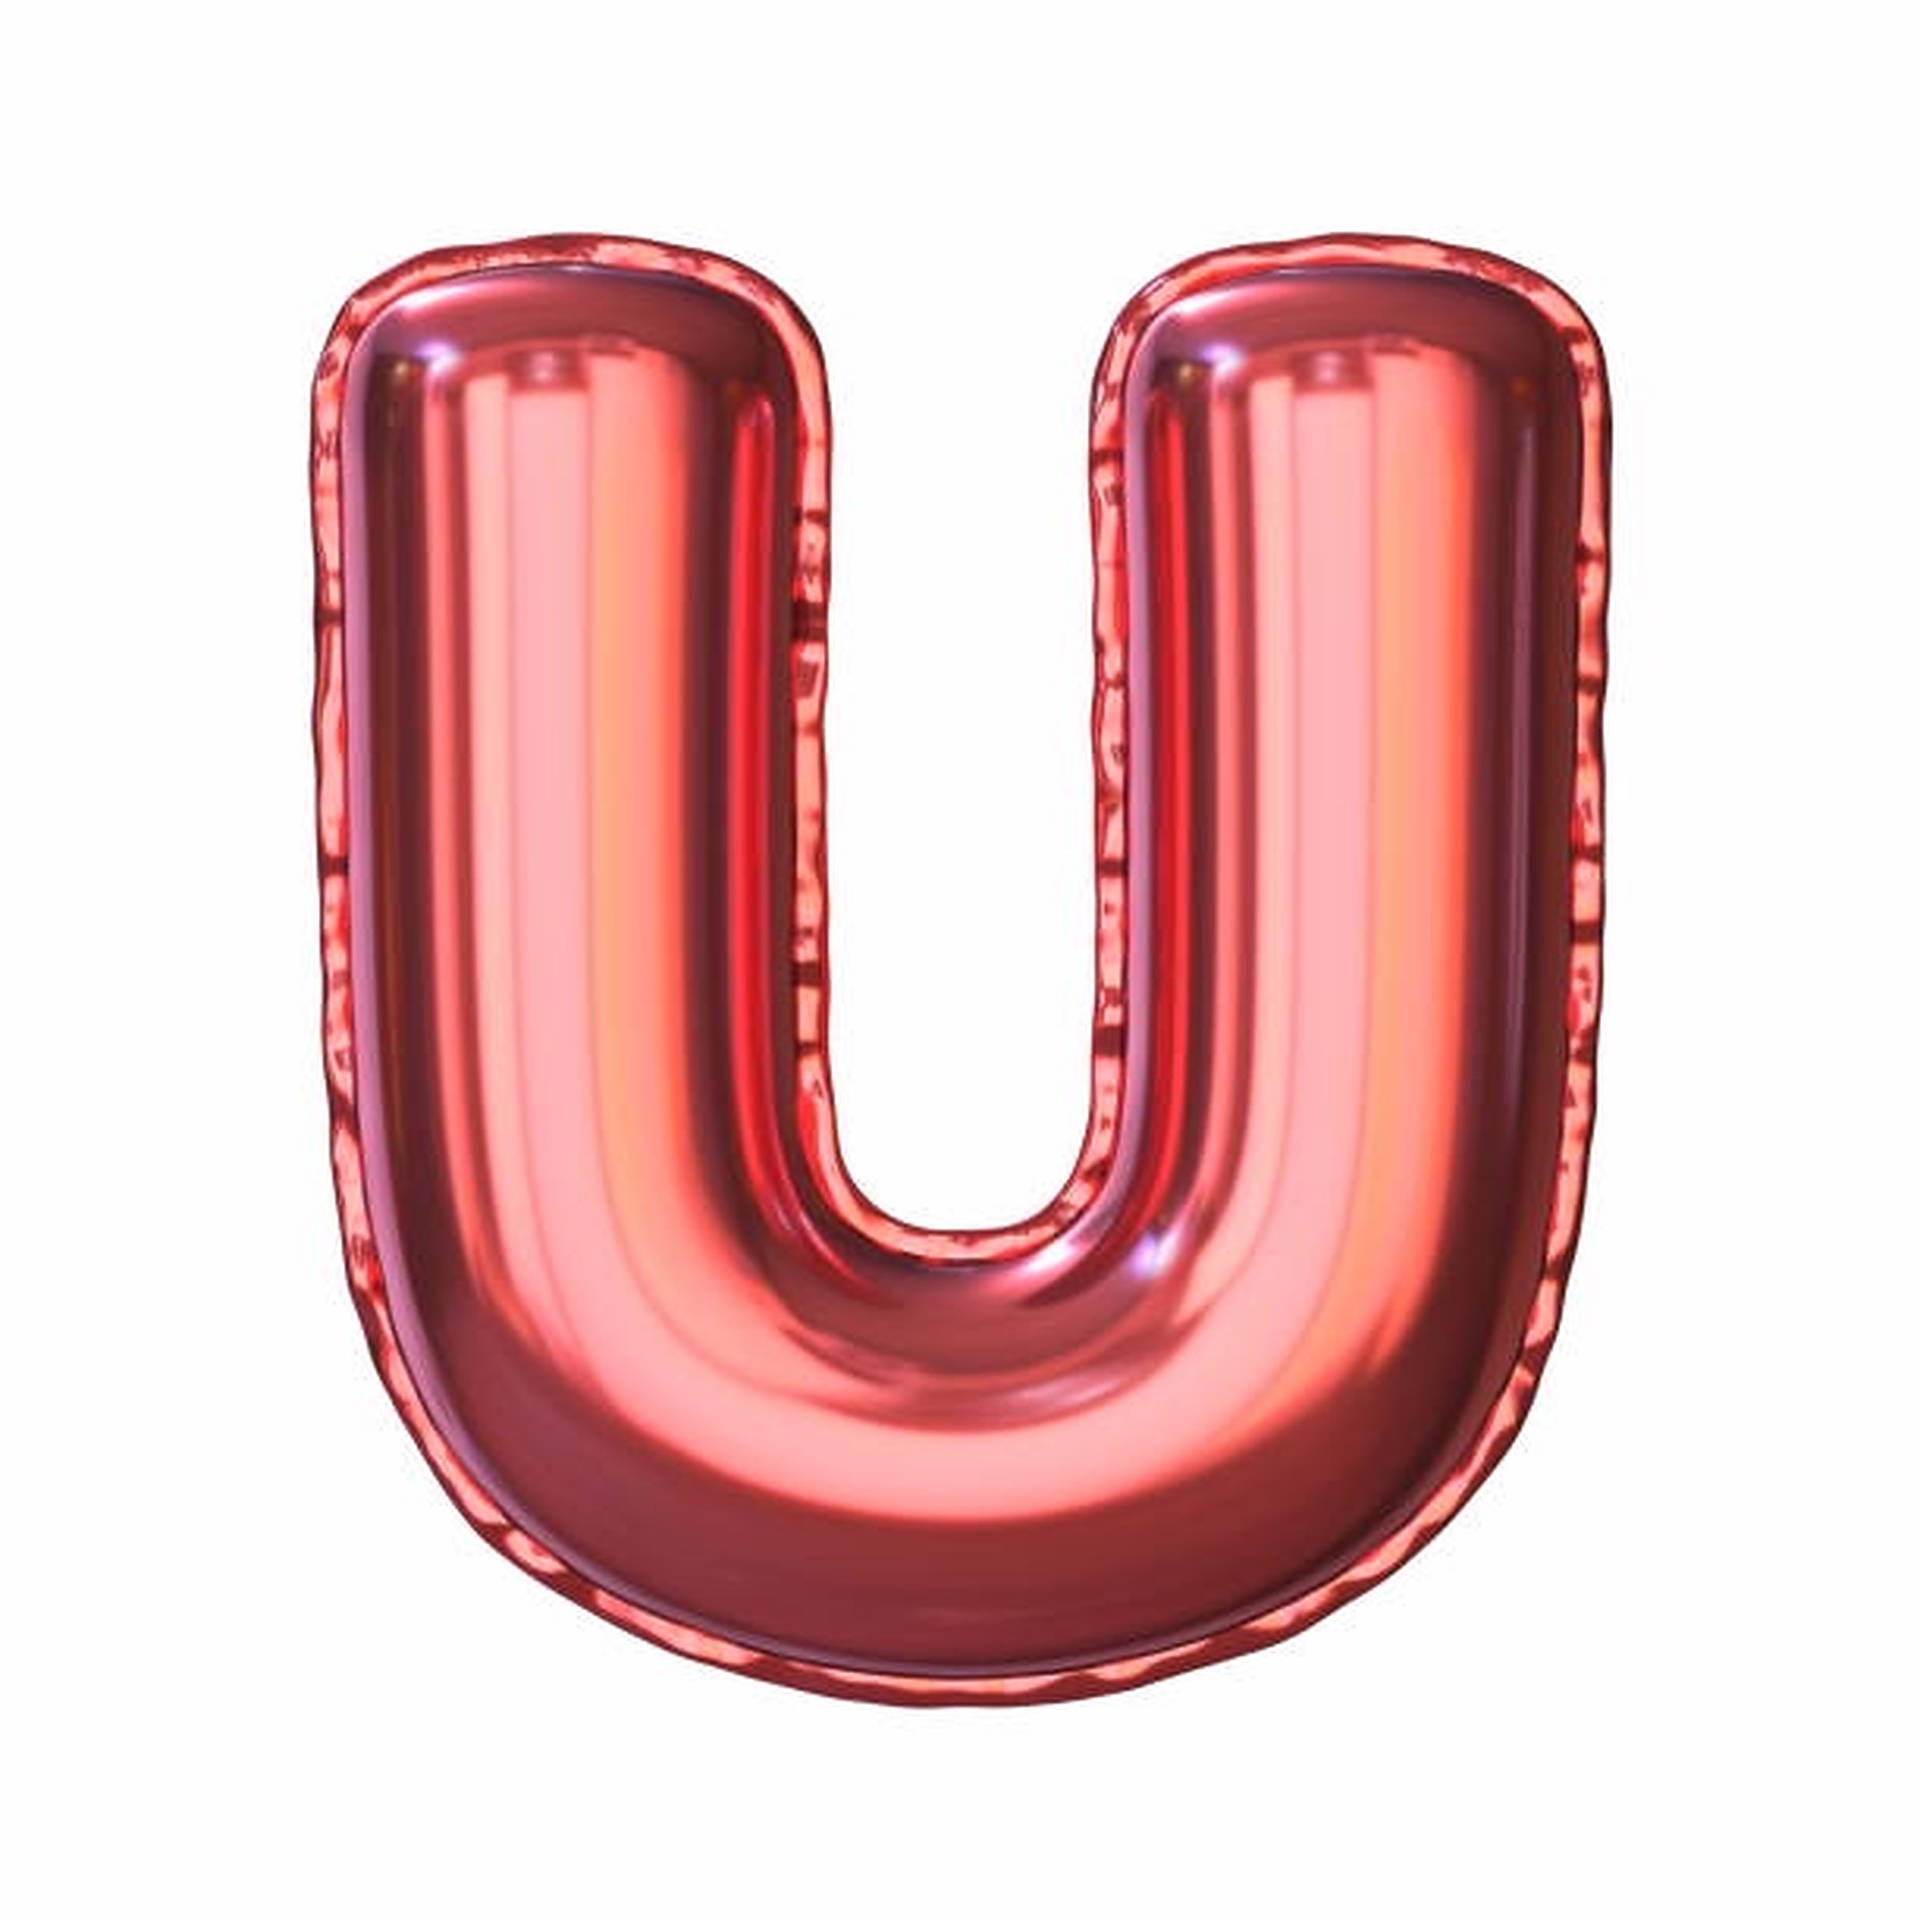 Red Letter U Balloon